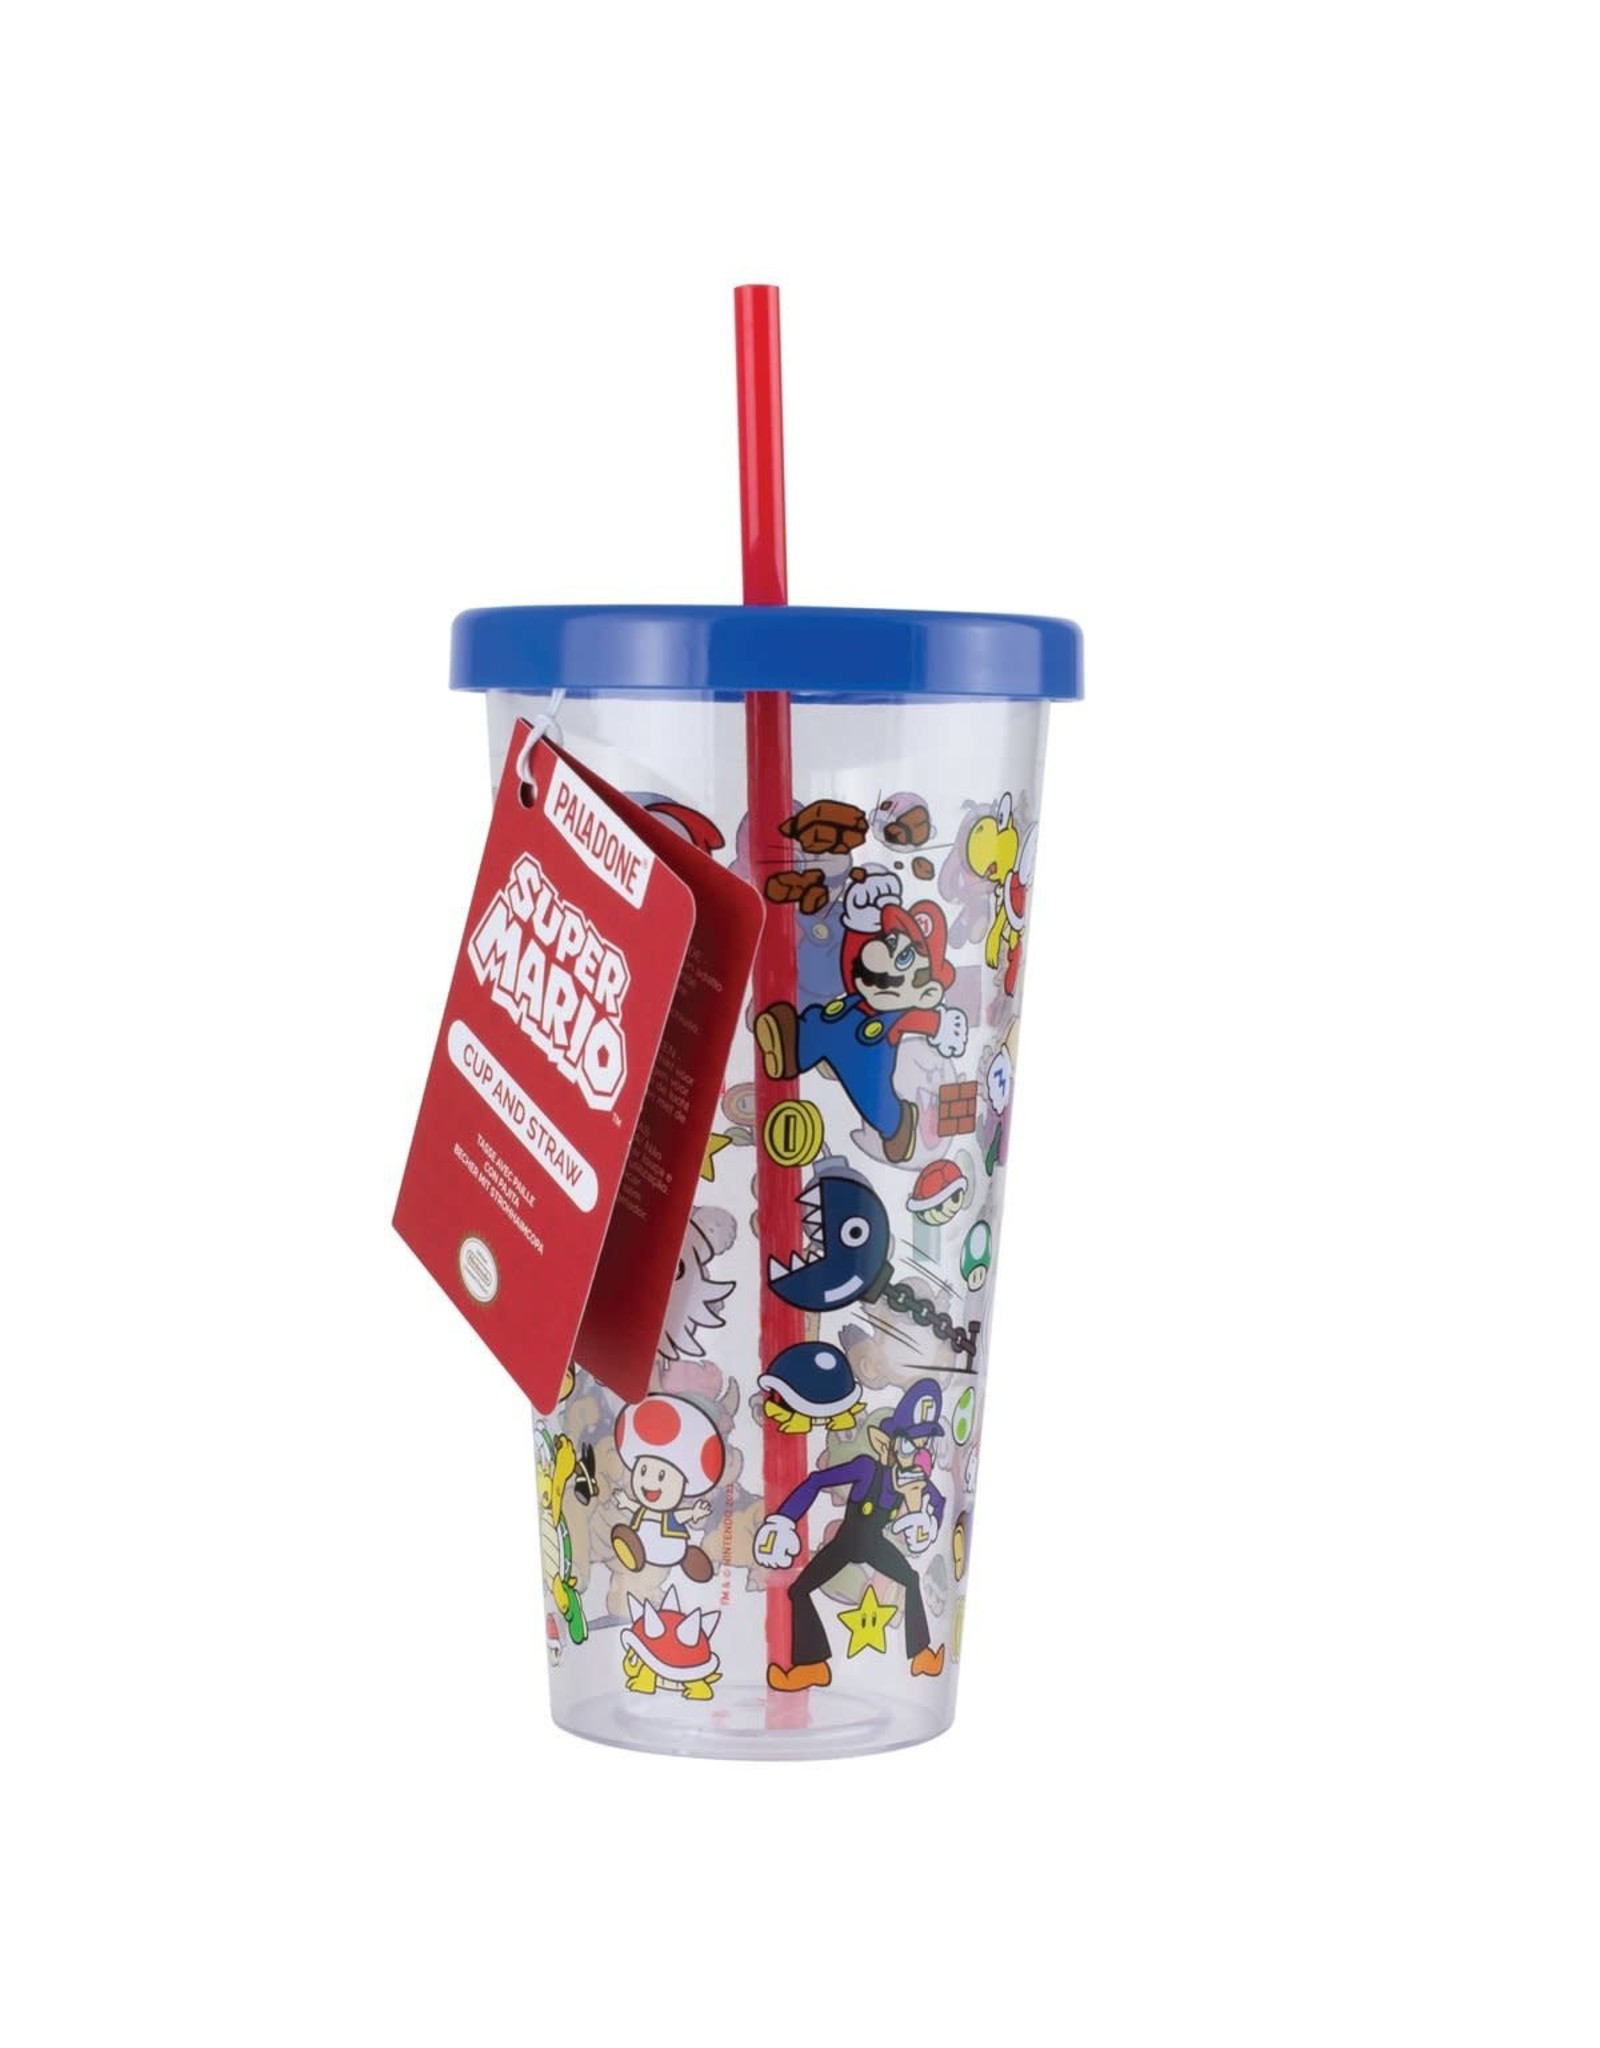 Paladone Super Mario Plastic Cup and Straw